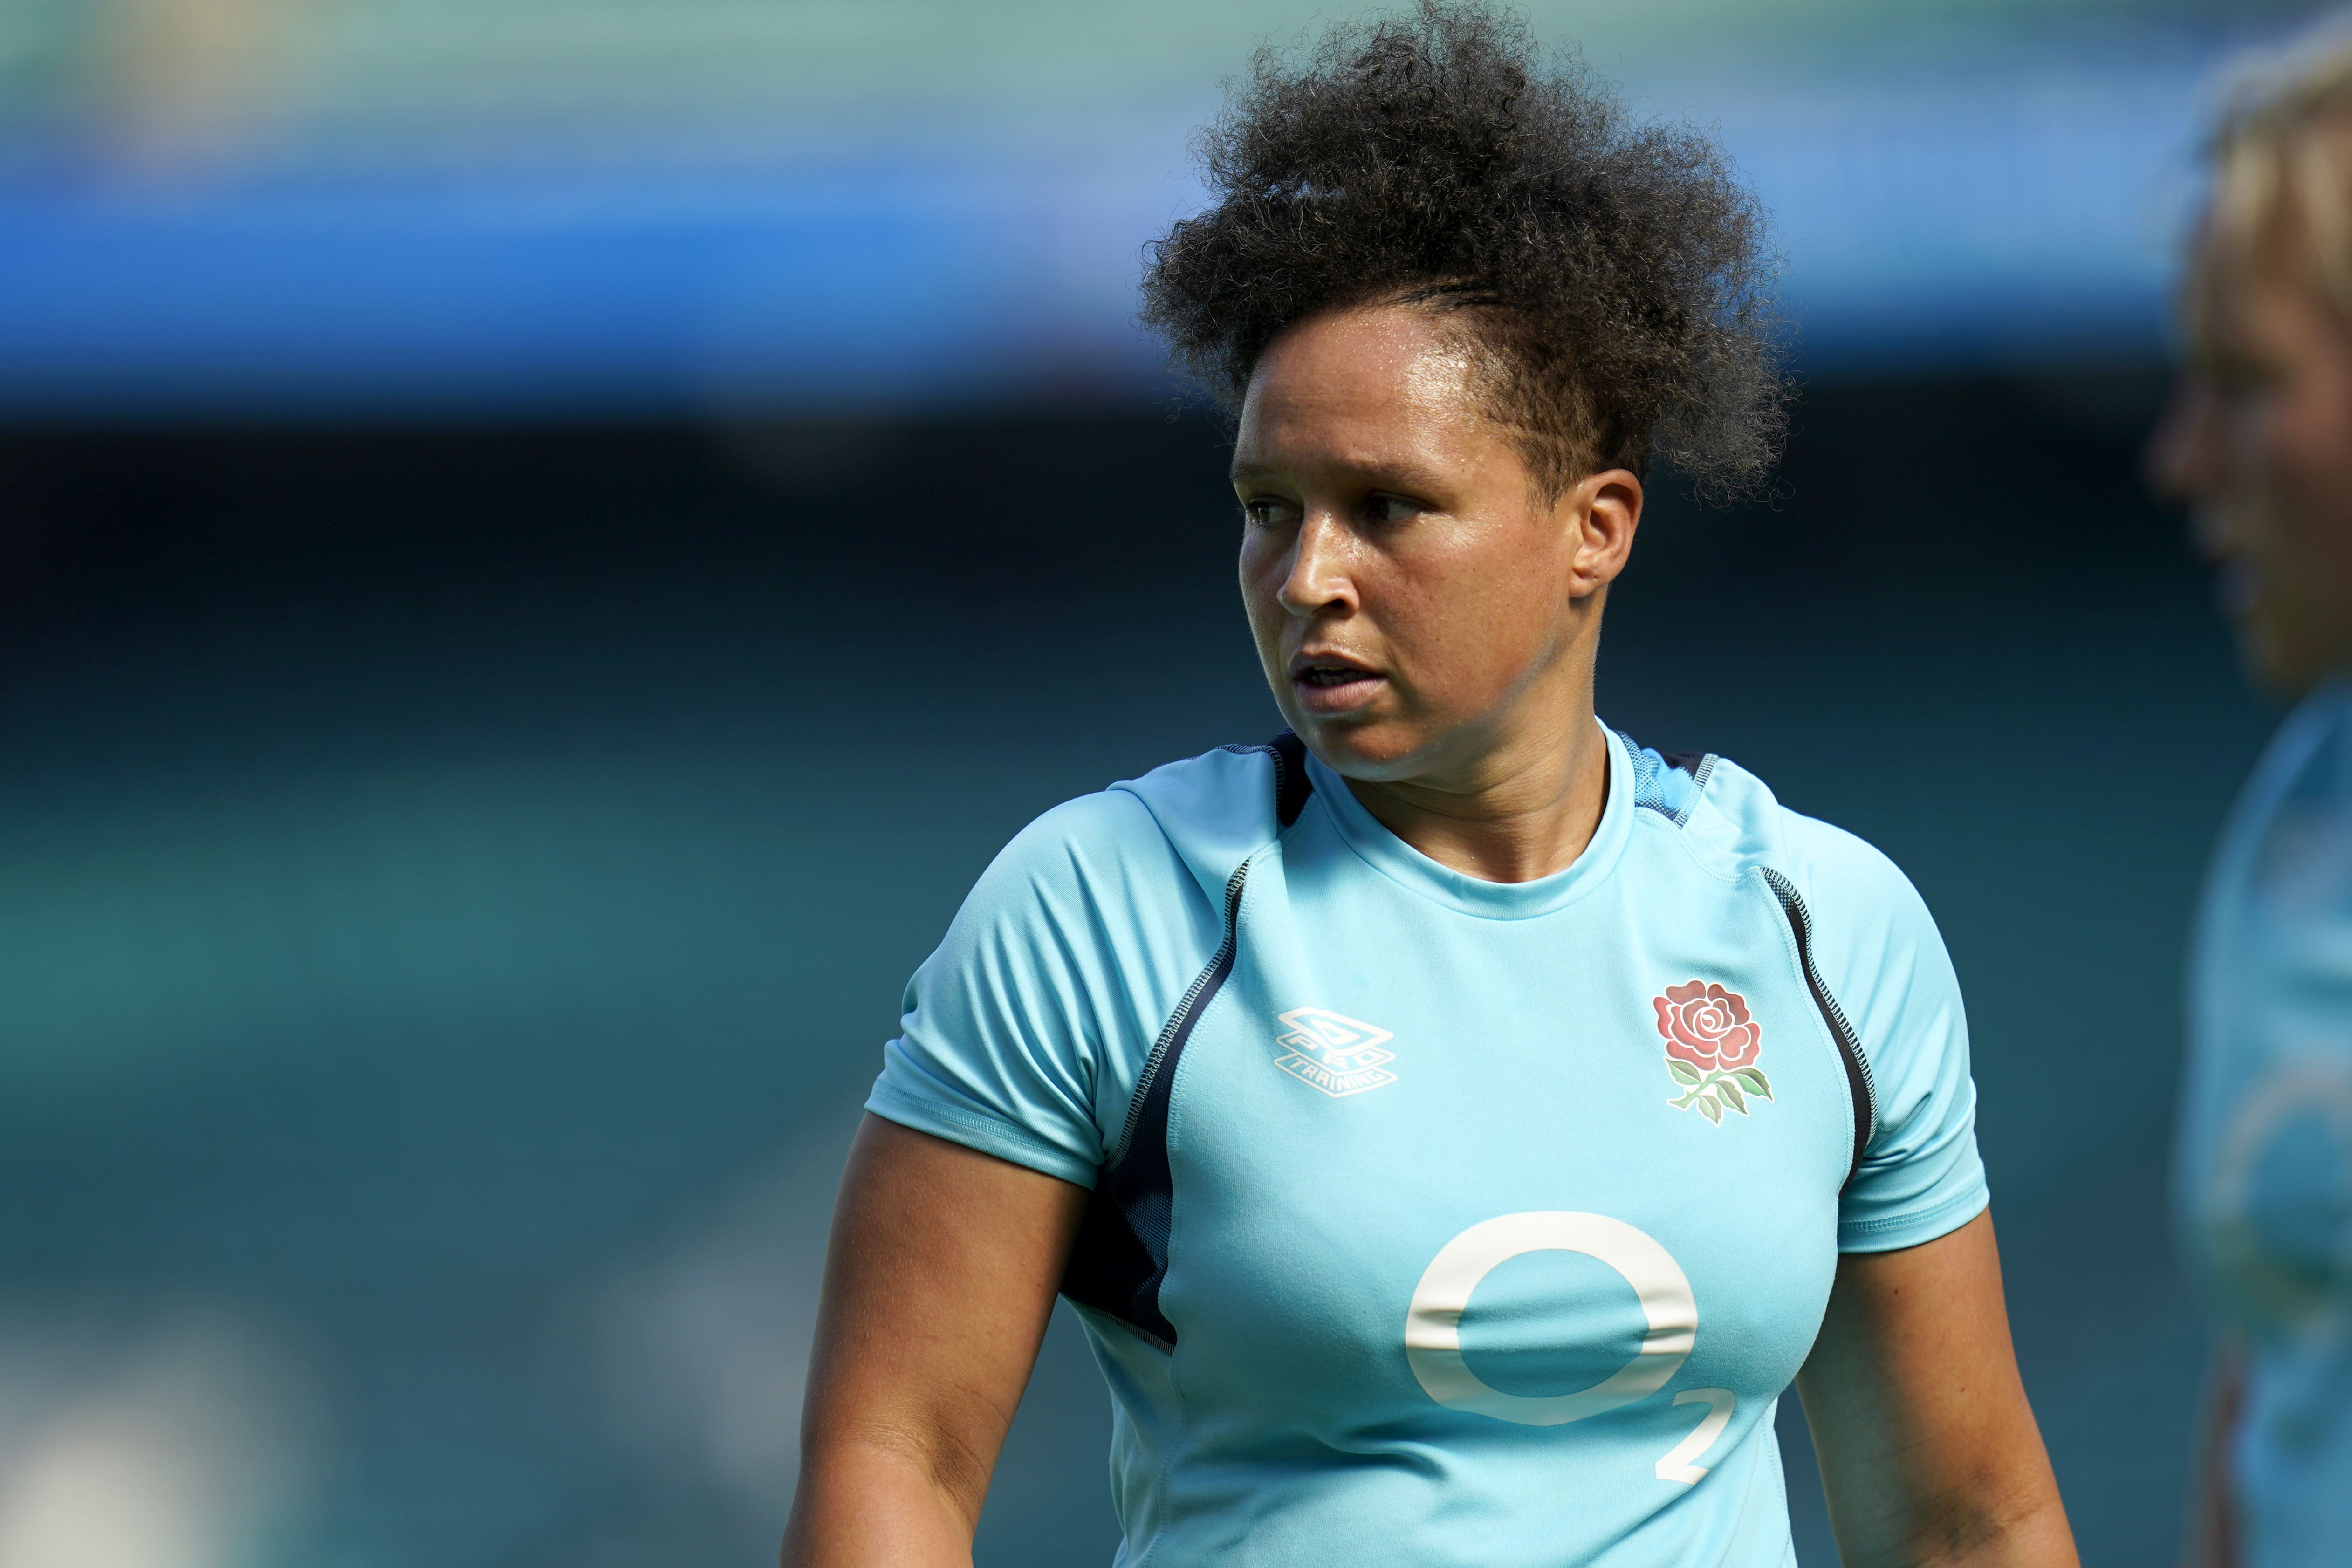 Shaunagh Brown admitted that England’s Rugby World Cup defeat was ‘gutting’ (Andrew Matthews/PA)